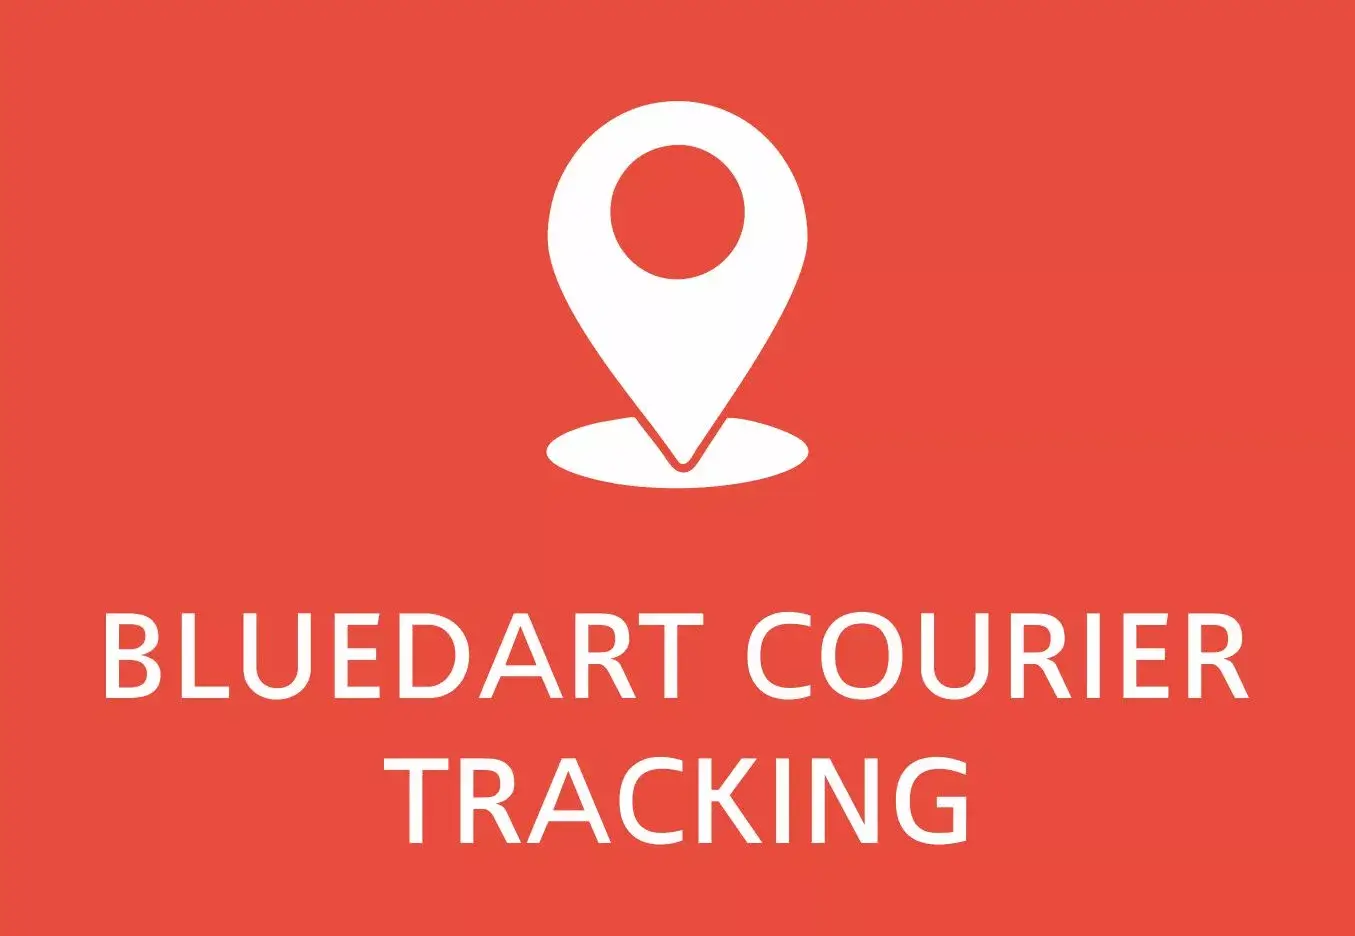 Bluedart Courier Tracking  | Find out your parcels through Bluedart tracking